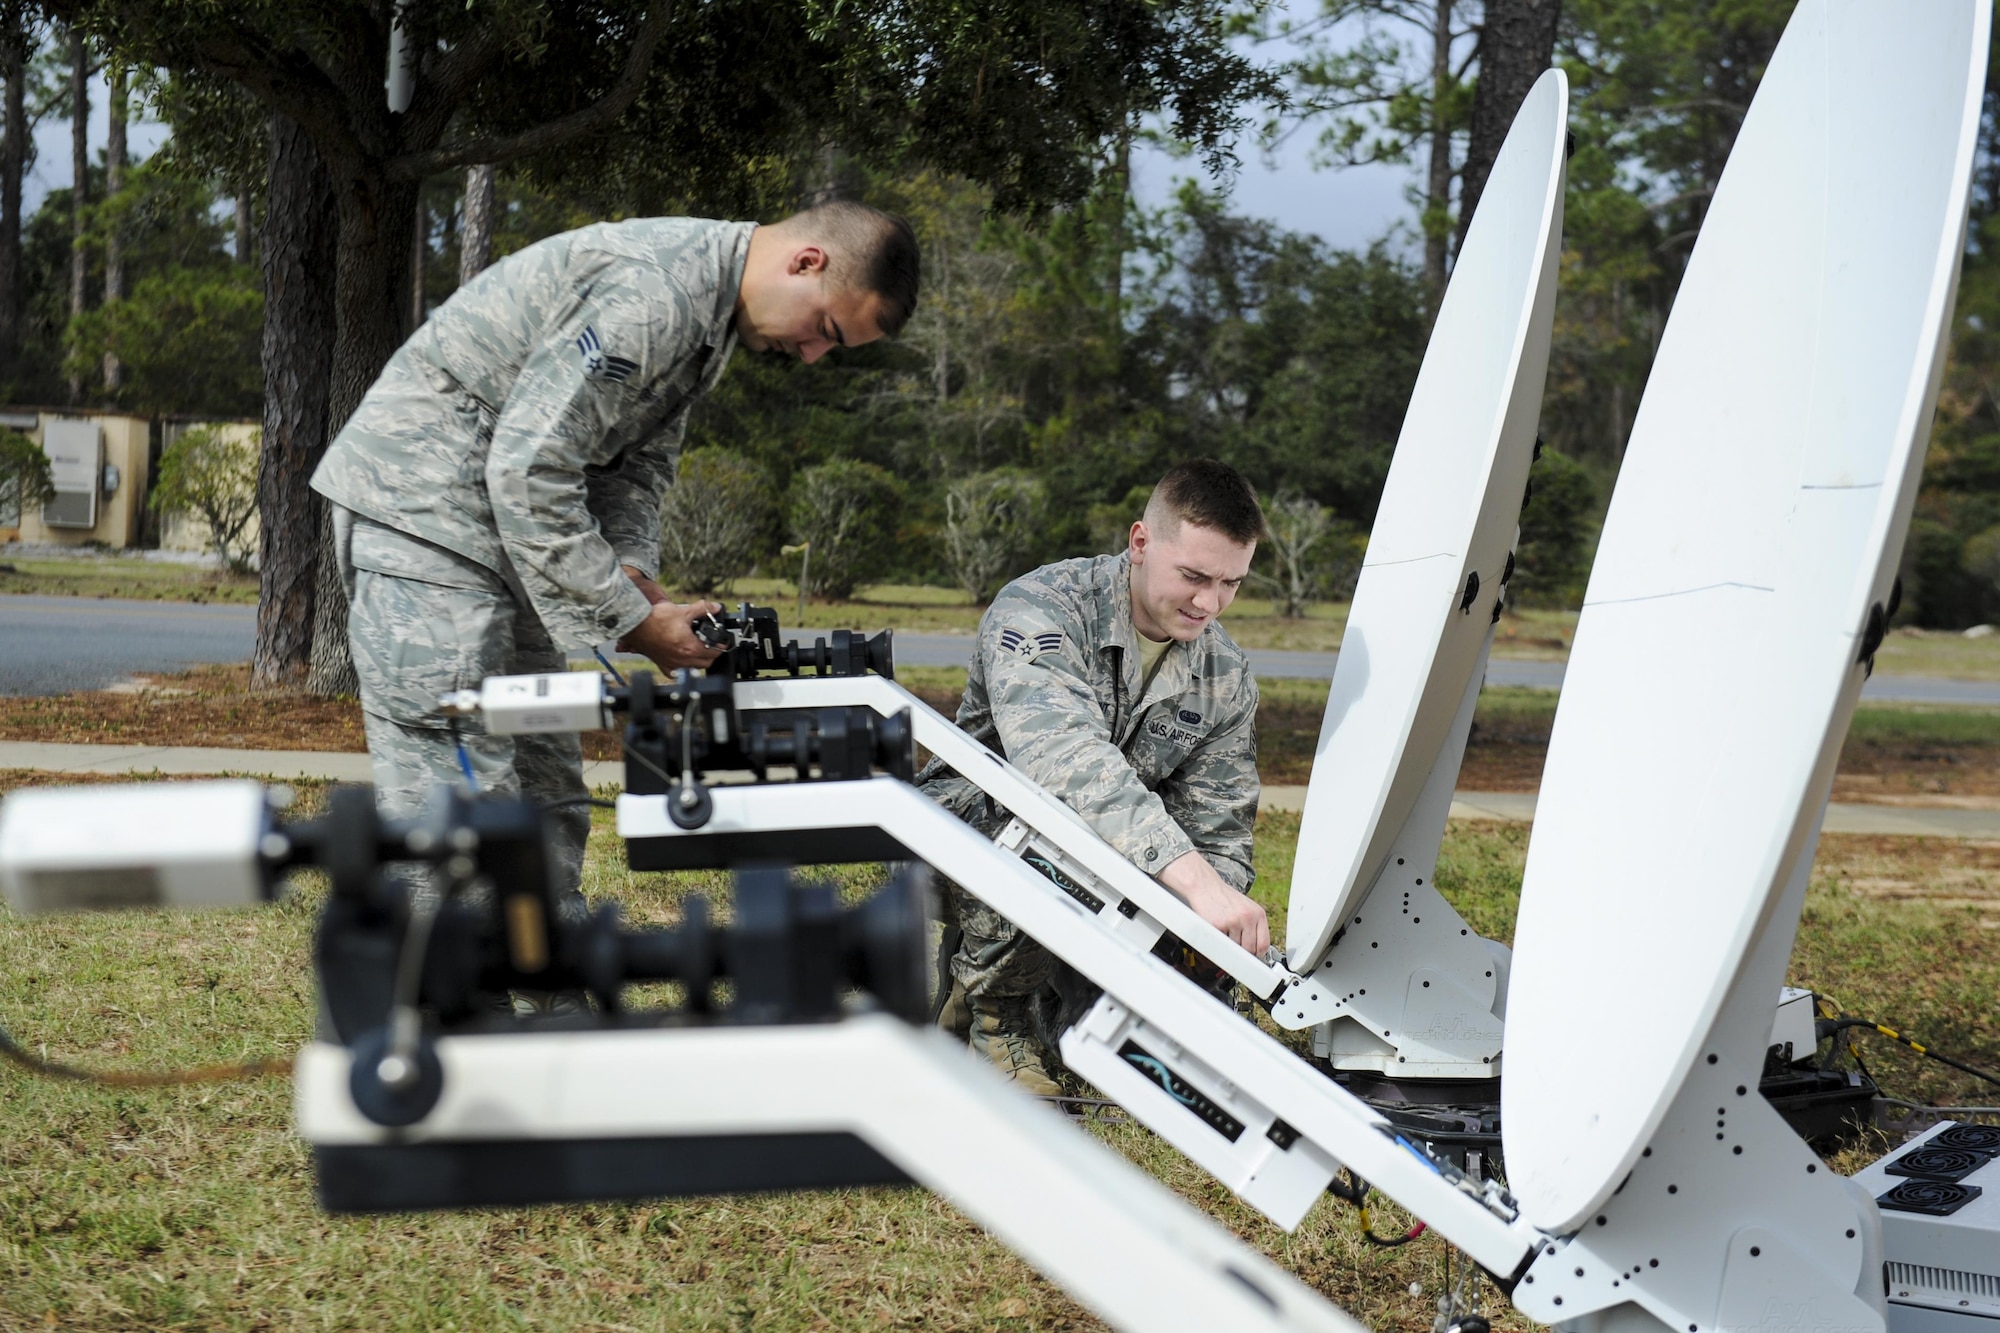 Senior Airman Daniel Robertson, left, a client systems journeyman with the 25th Intelligence Squadron, and Senior Airman Isaac Parent, a cyber transport journeyman with the 25 Intelligence Squadron install a Hawkeye lite satellite dish at Hurlburt Field, Fla., Jan. 11, 2017. These dishes are used to provide secured internet access in deployed locations to continue special operations missions. Anytime, anyplace. (U.S. Airman Dennis Spain)